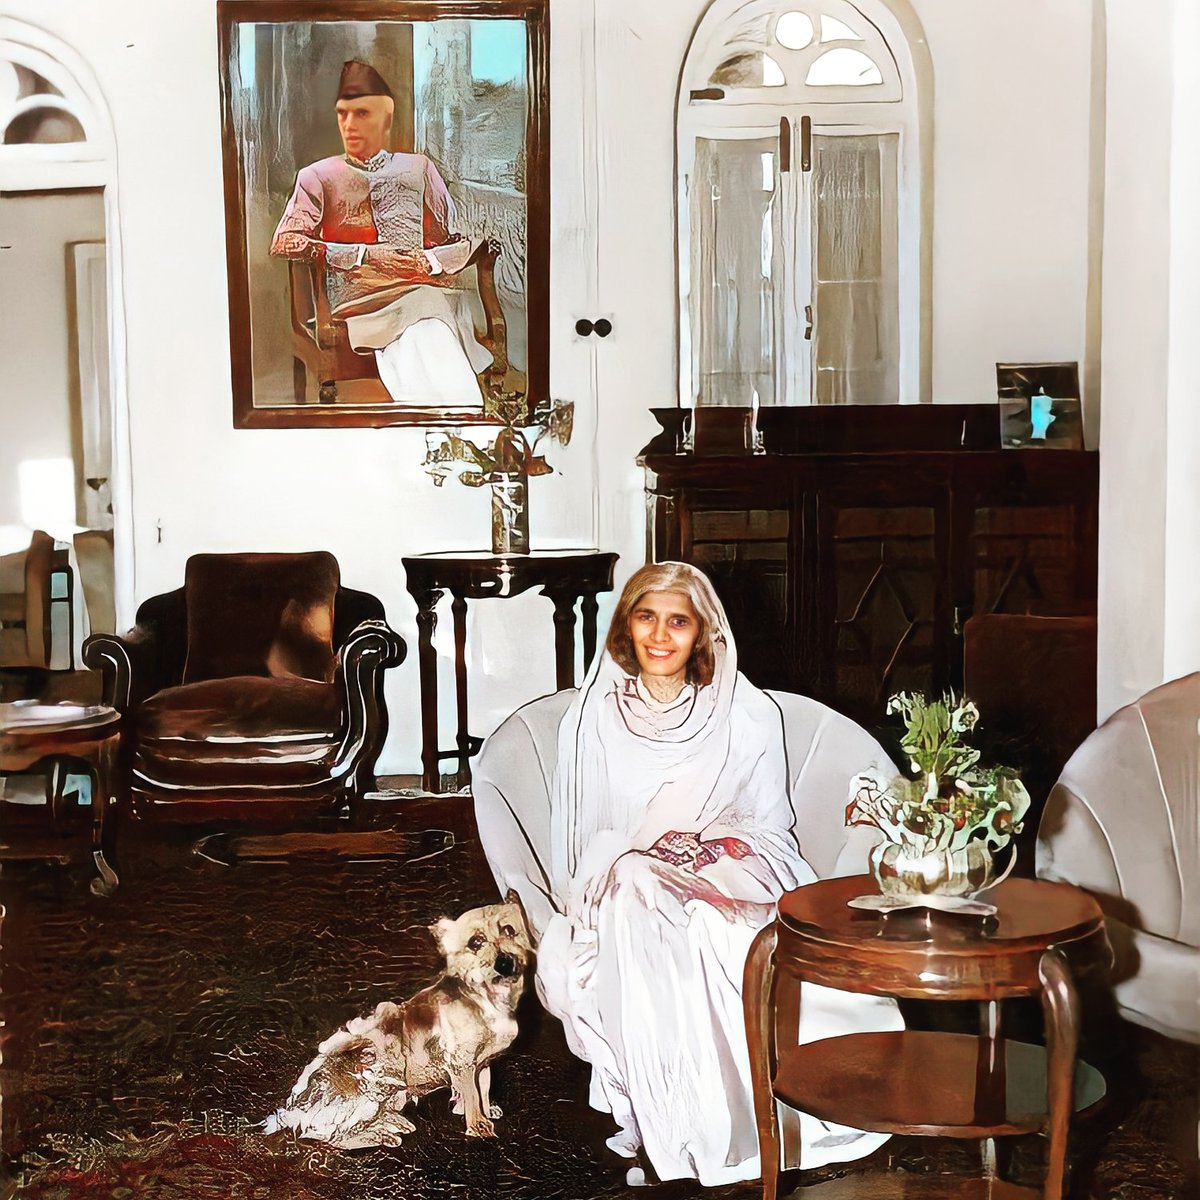 Today marks the 55th death anniversary of Fatima Jinnah. She was a dental surgeon who graduated from University of Calcutta but left her profession to join political struggle of her brother, Mohammad Ali Jinnah. She was given the title 'Mother of the Nation' or Maadar-e-Millat.